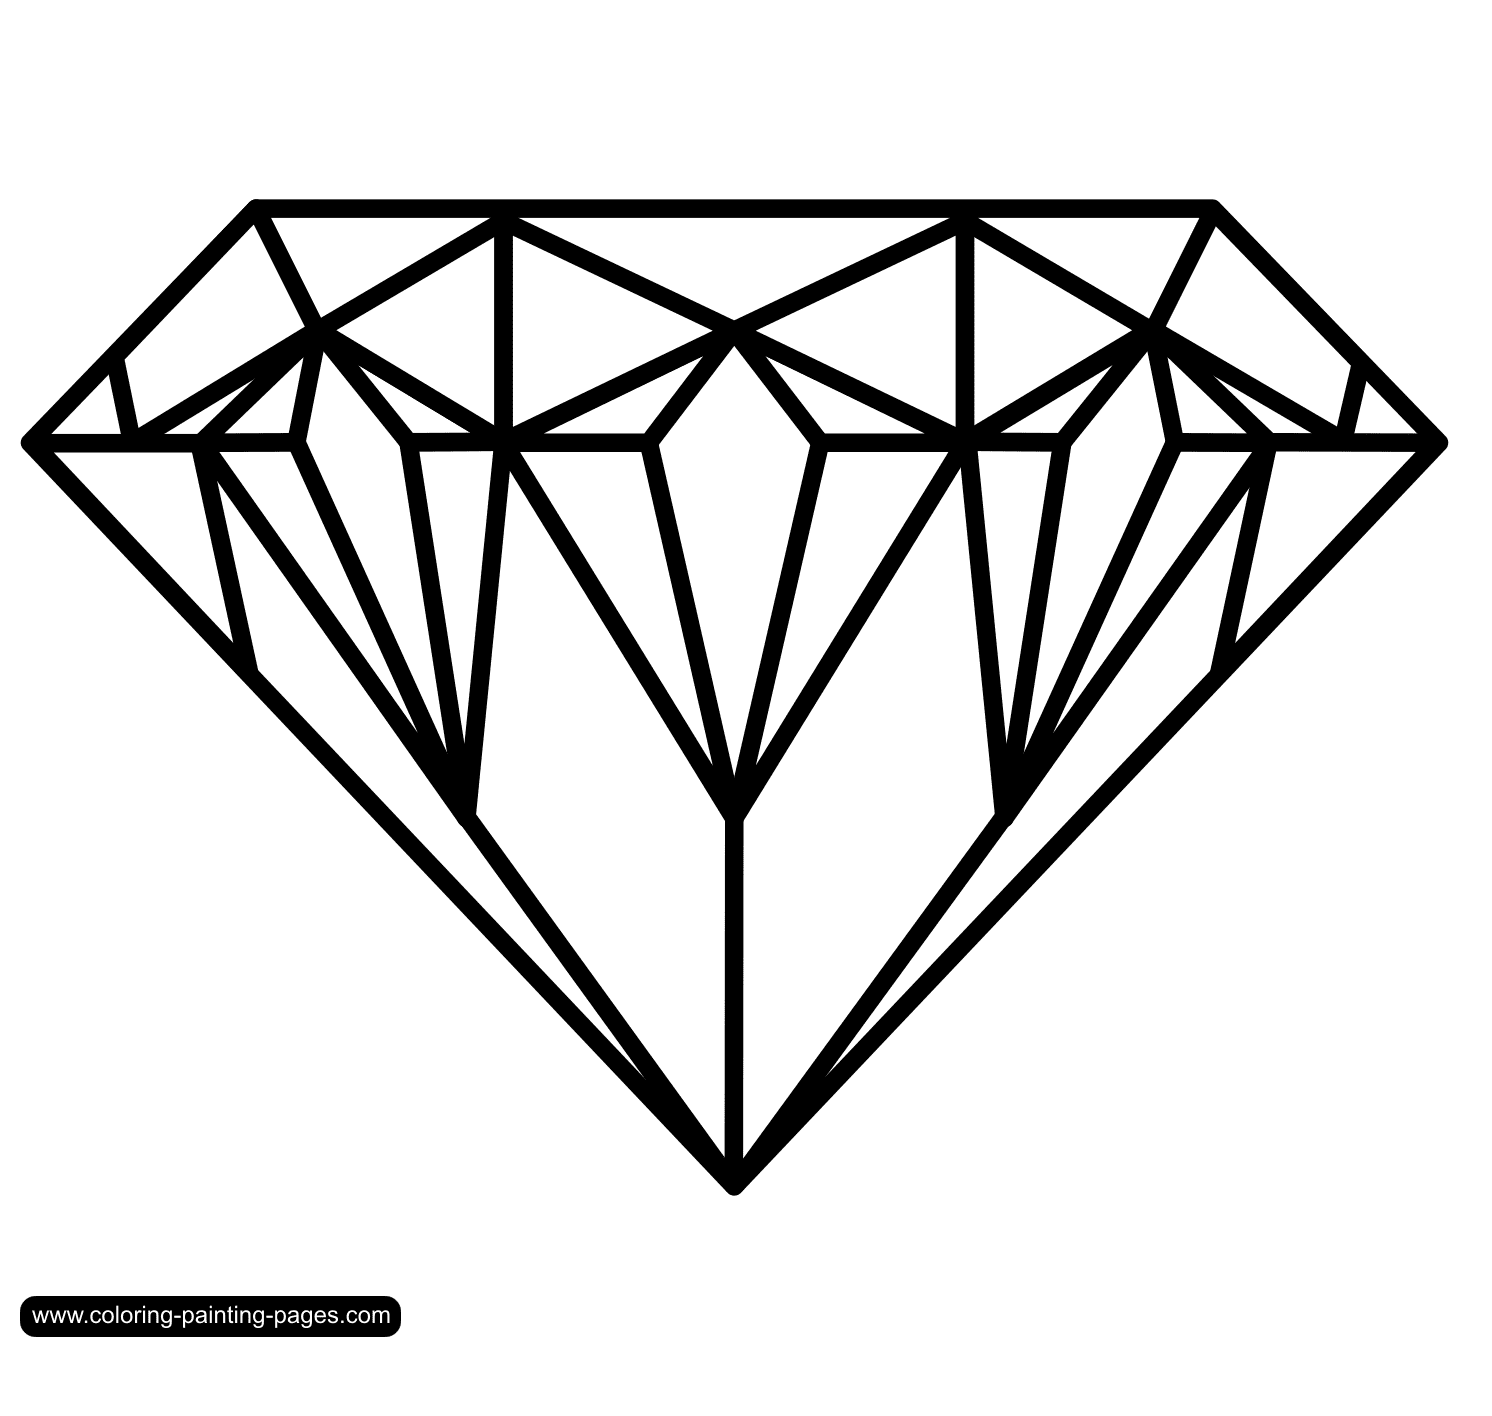 Diamond to Print Coloring Pages